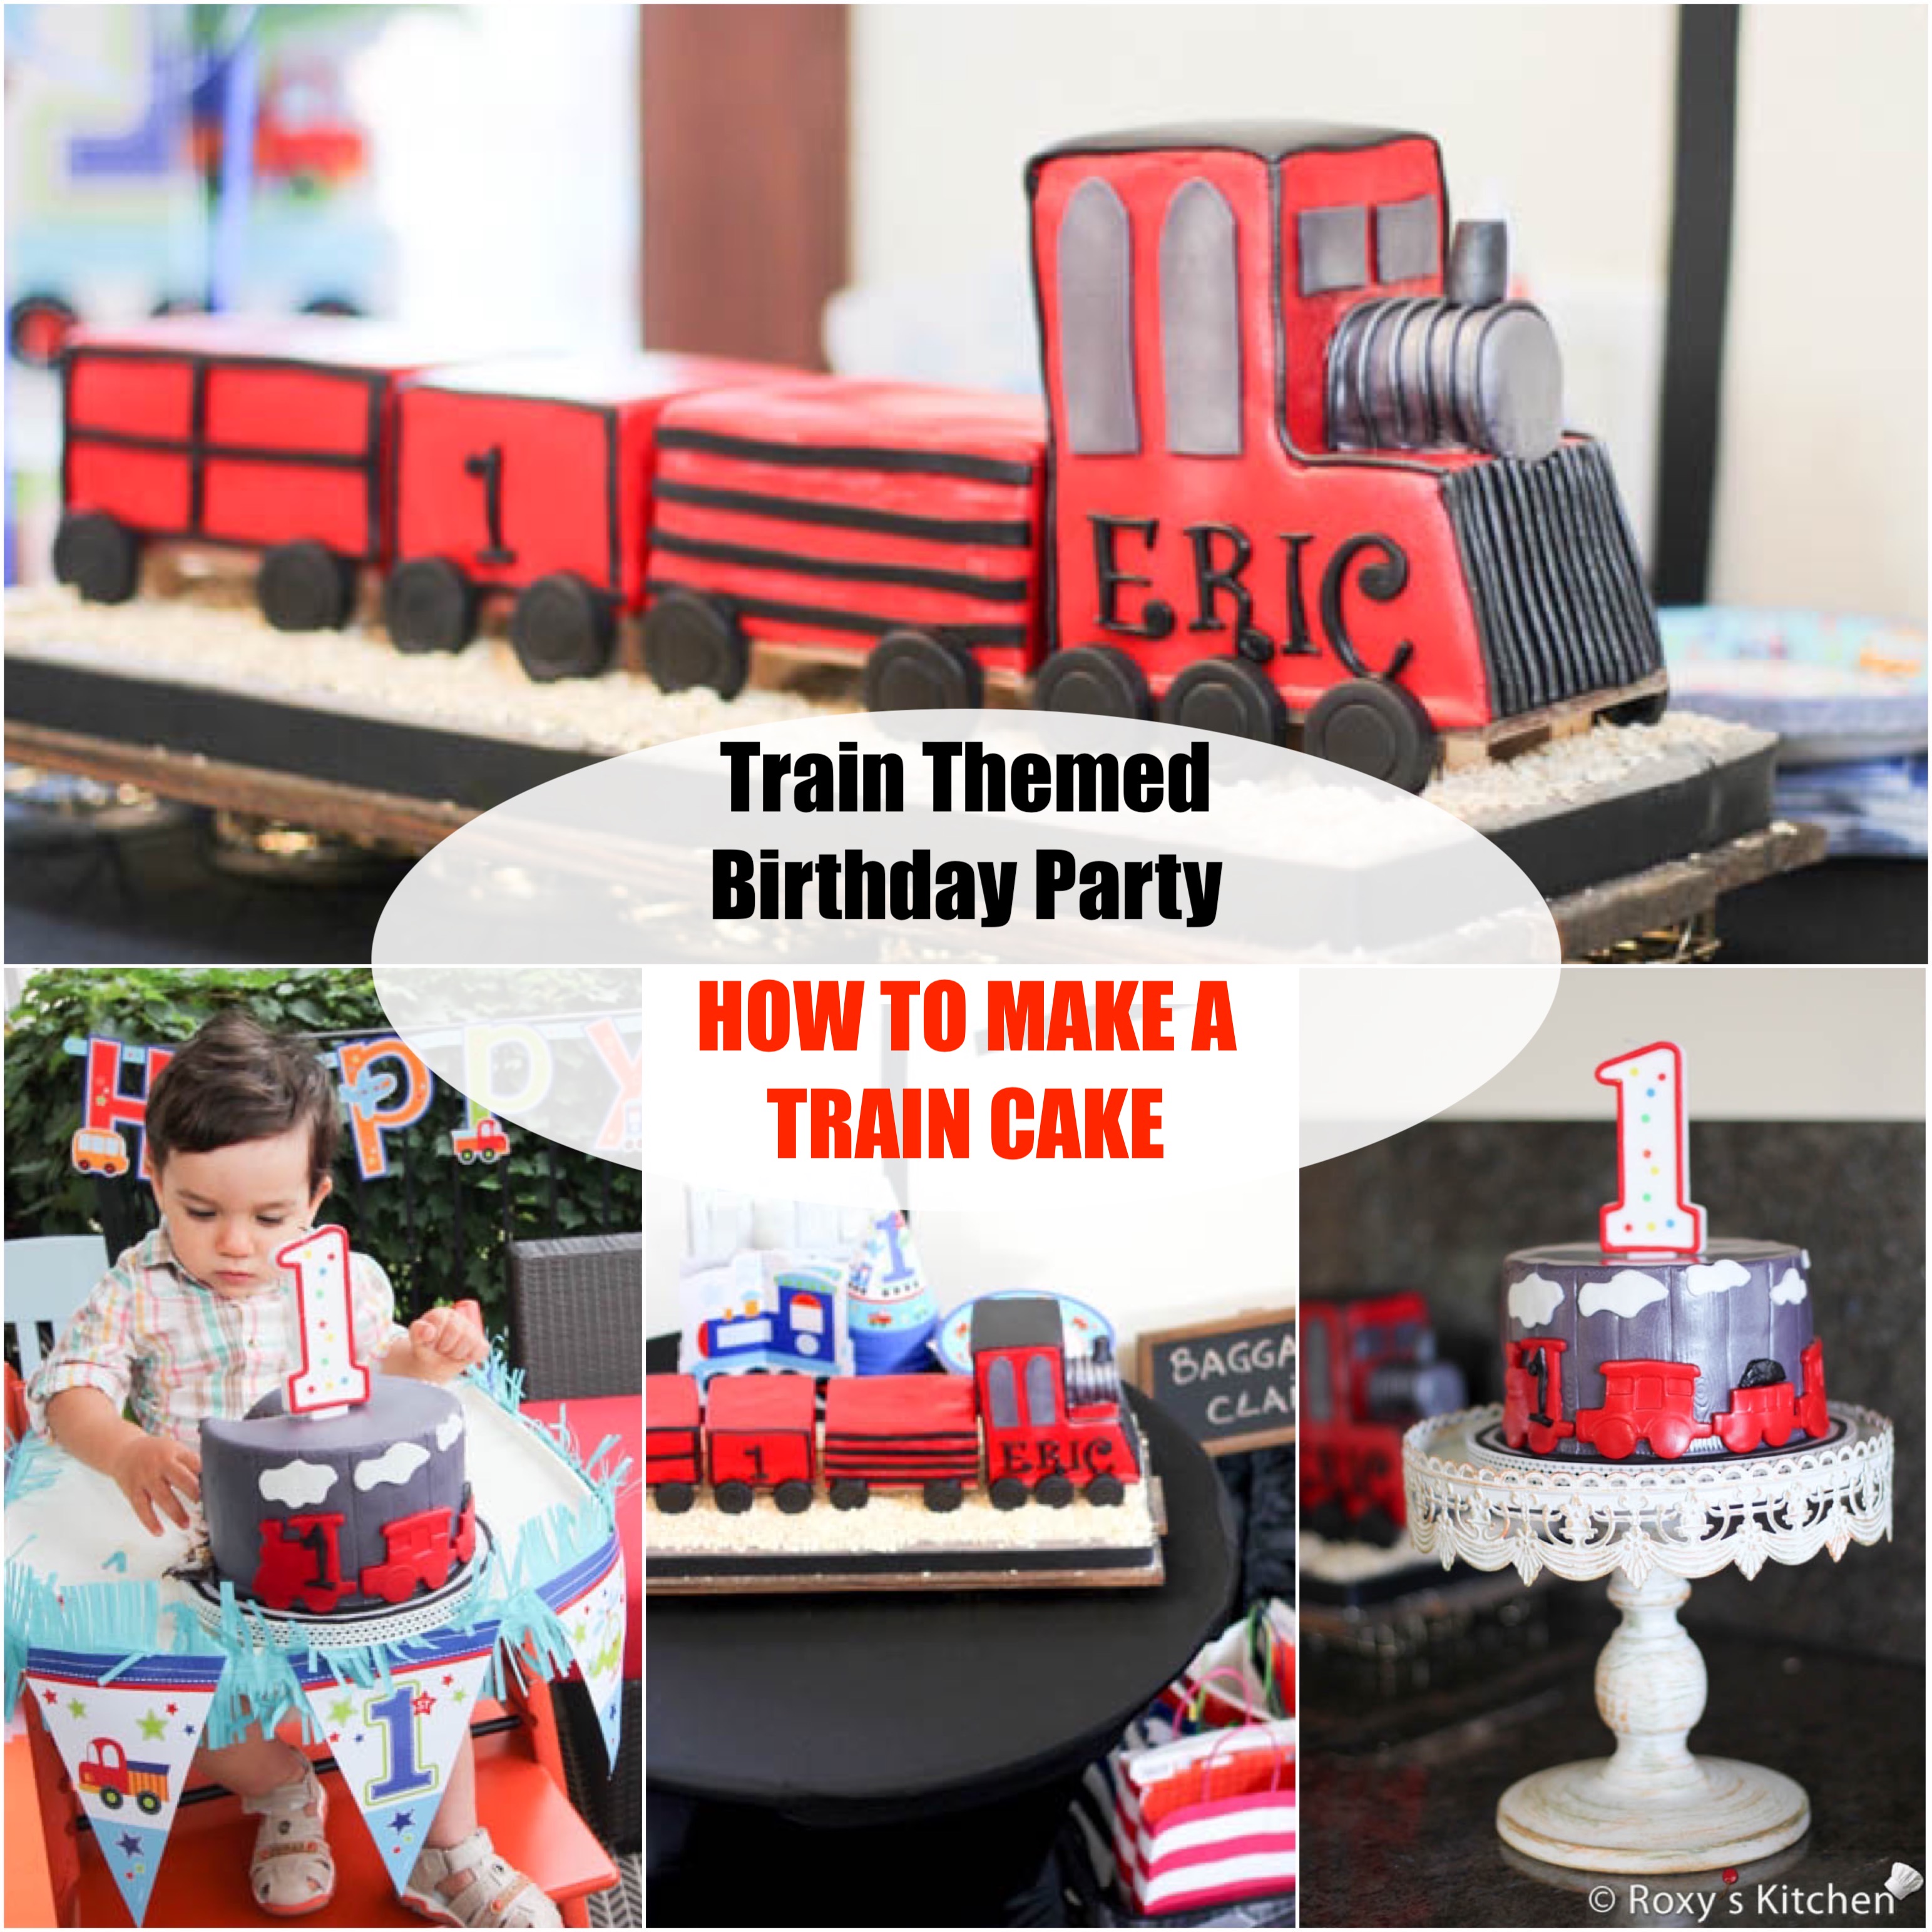 Train theme kids birthday cakes picture of Thomas the train on the train  track on Sodor